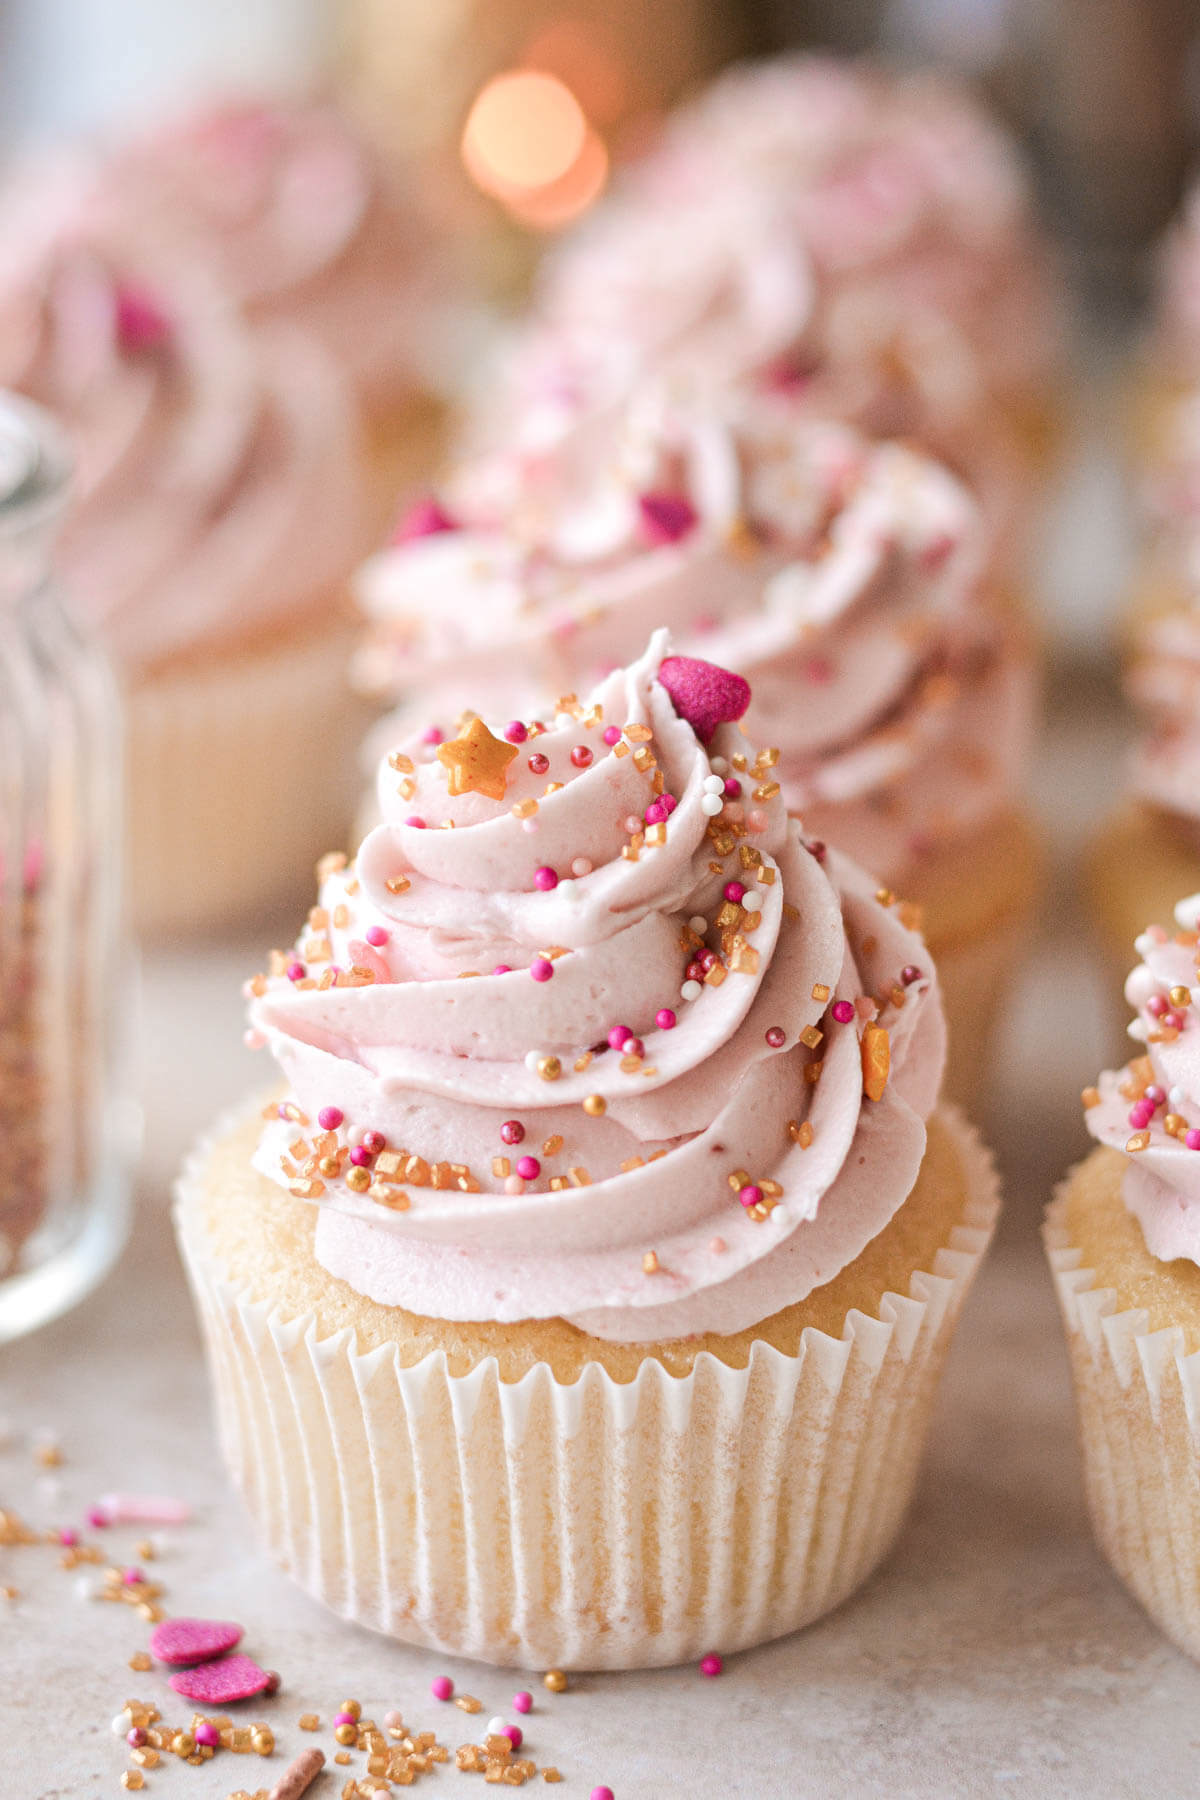 Vanilla cupcake with pink raspberry buttercream and valentines sprinkles.